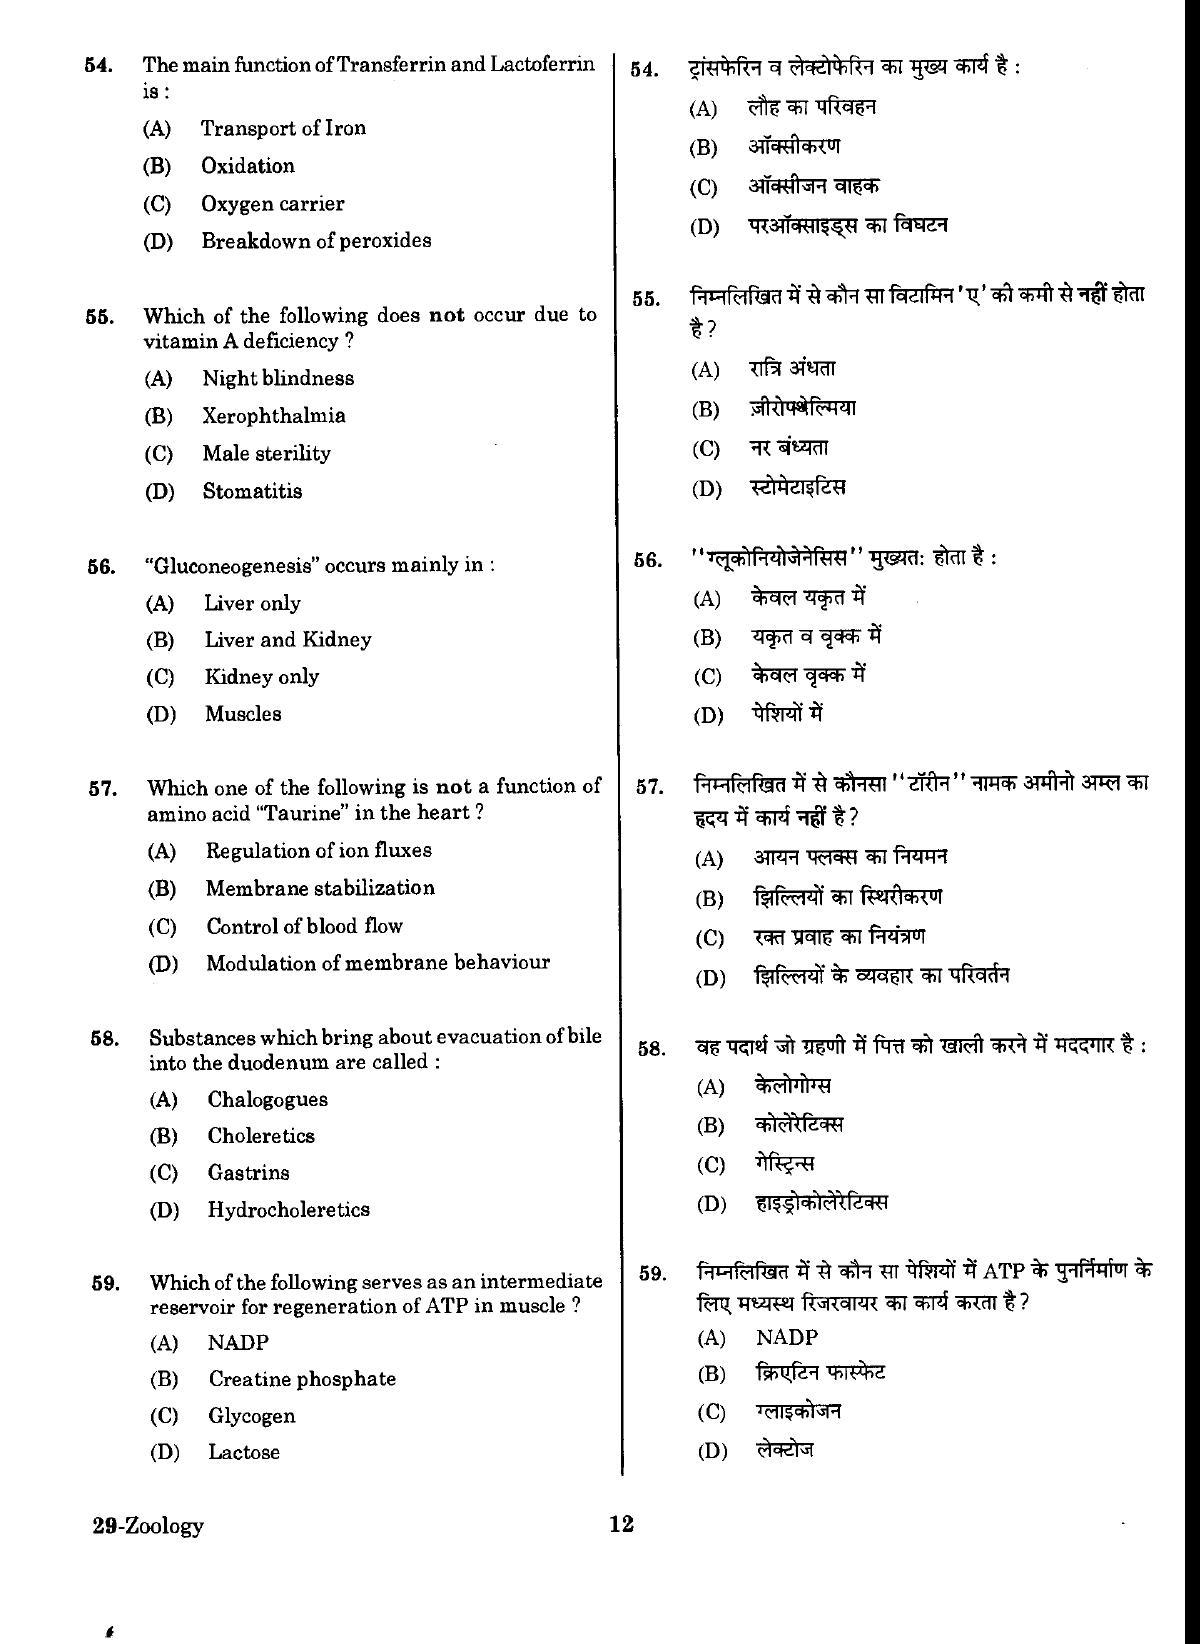 URATPG Zoology Sample Question Paper 2018 - Page 11